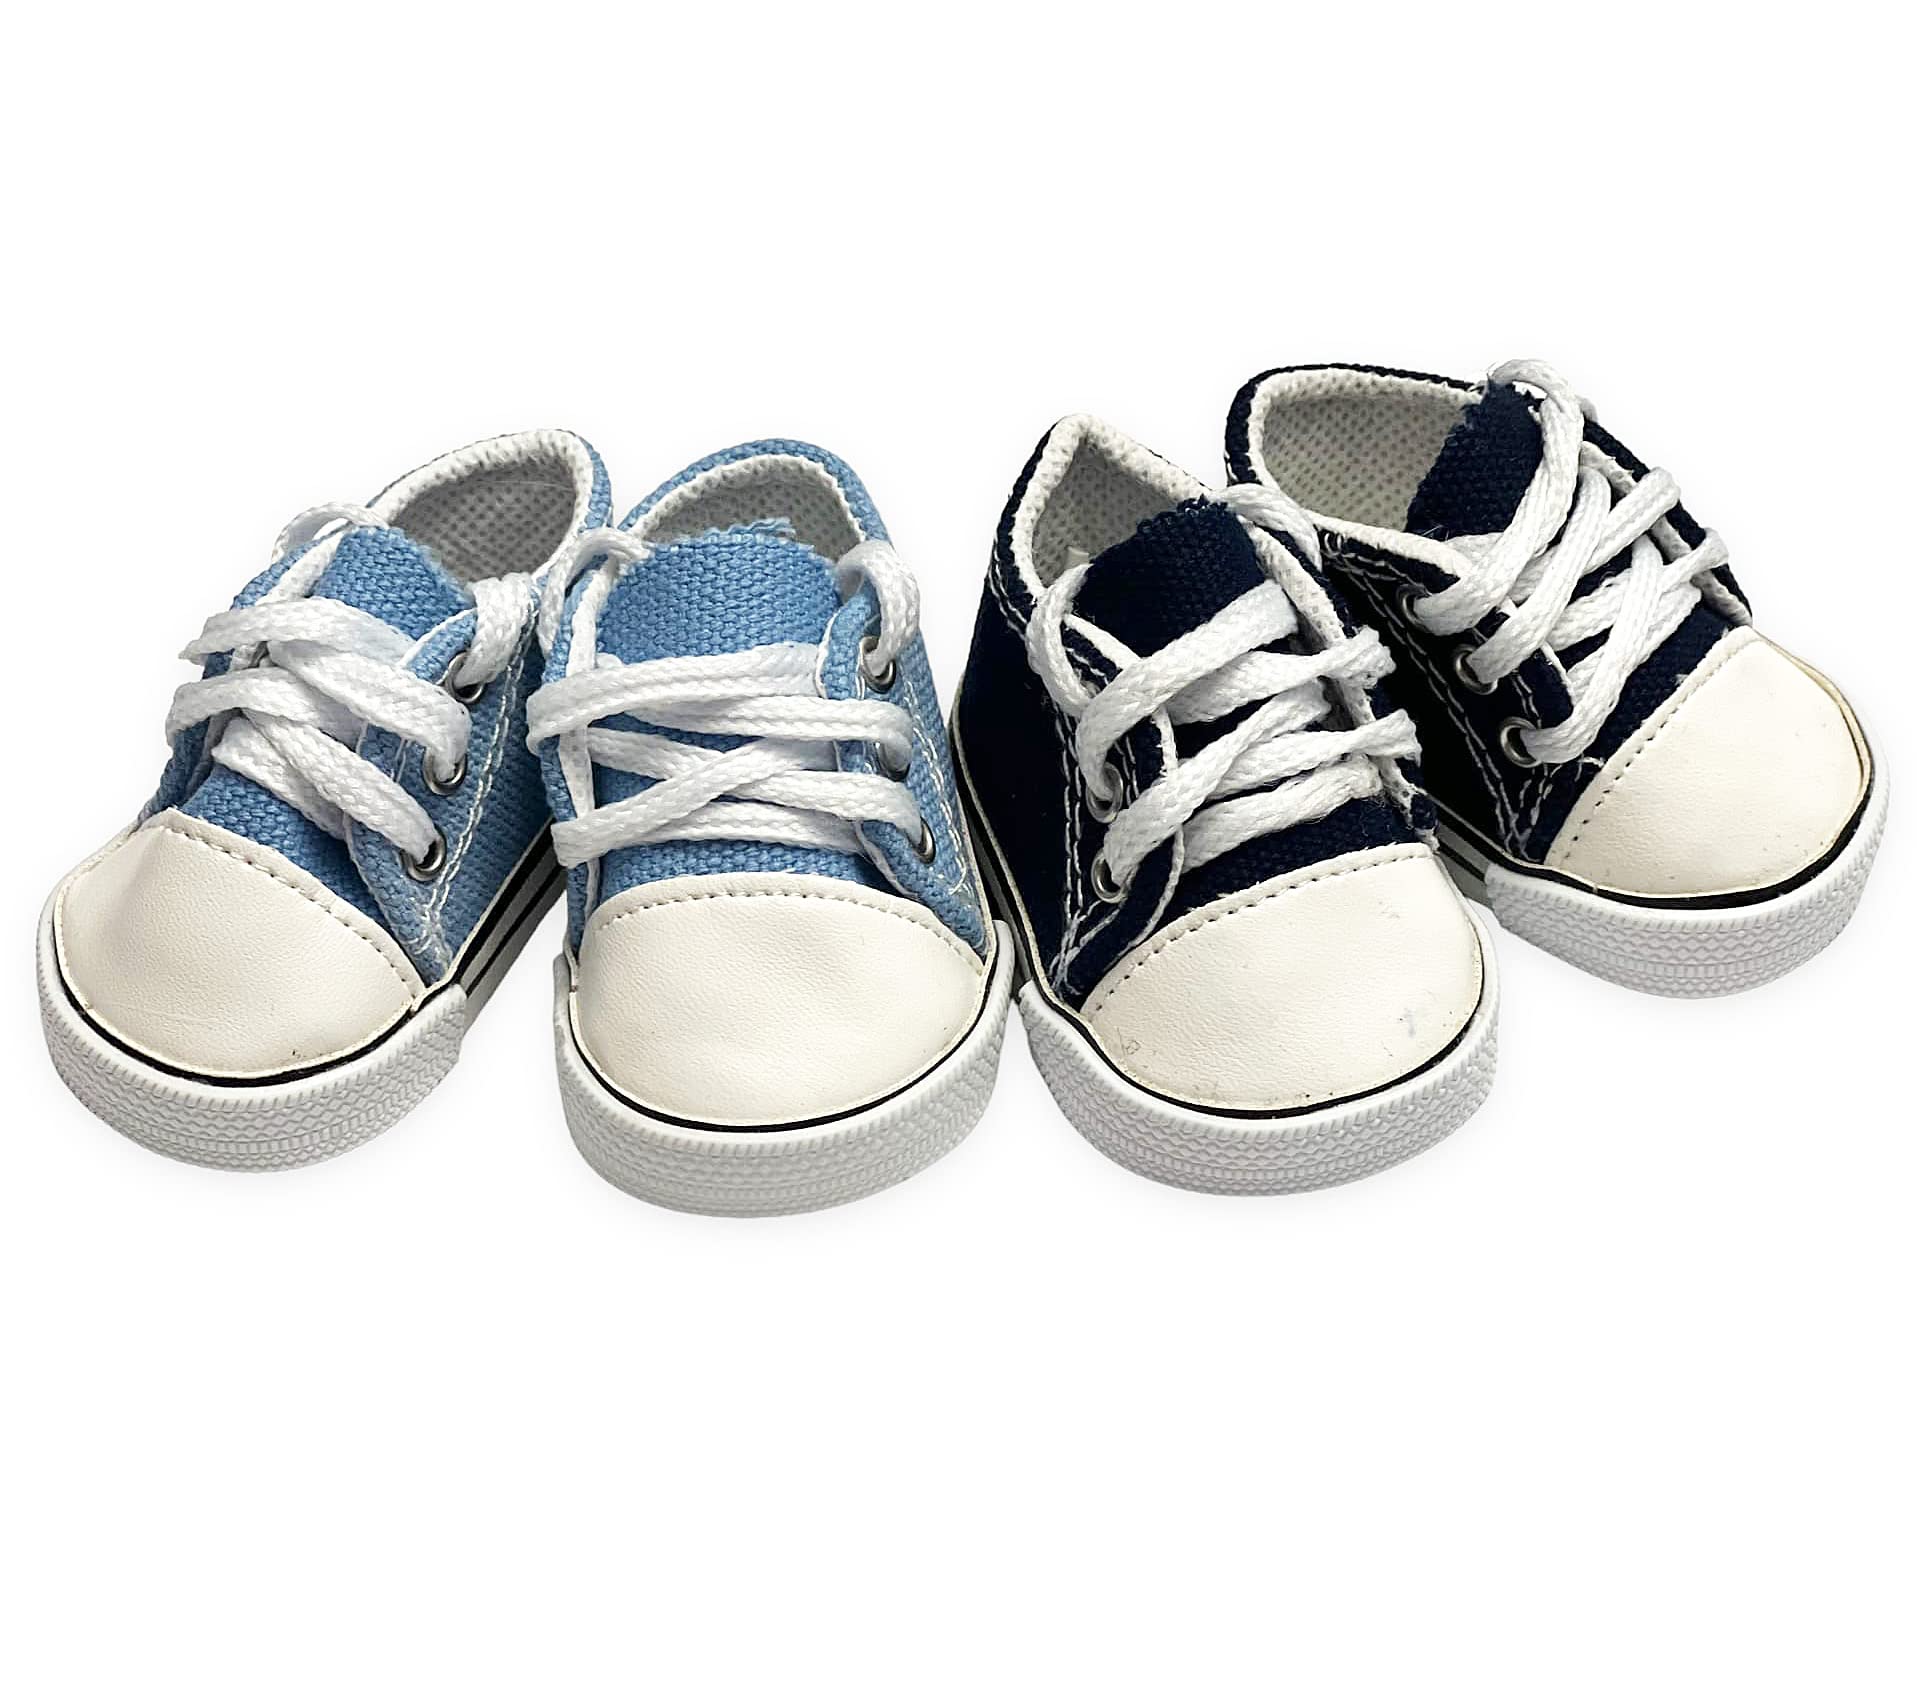 MBD 2 Pack Canvas Tennis Shoes Fits 18 Inch Girl Dolls- 18 Inch Doll Shoes (Ocean Blue/Seaside Blue)